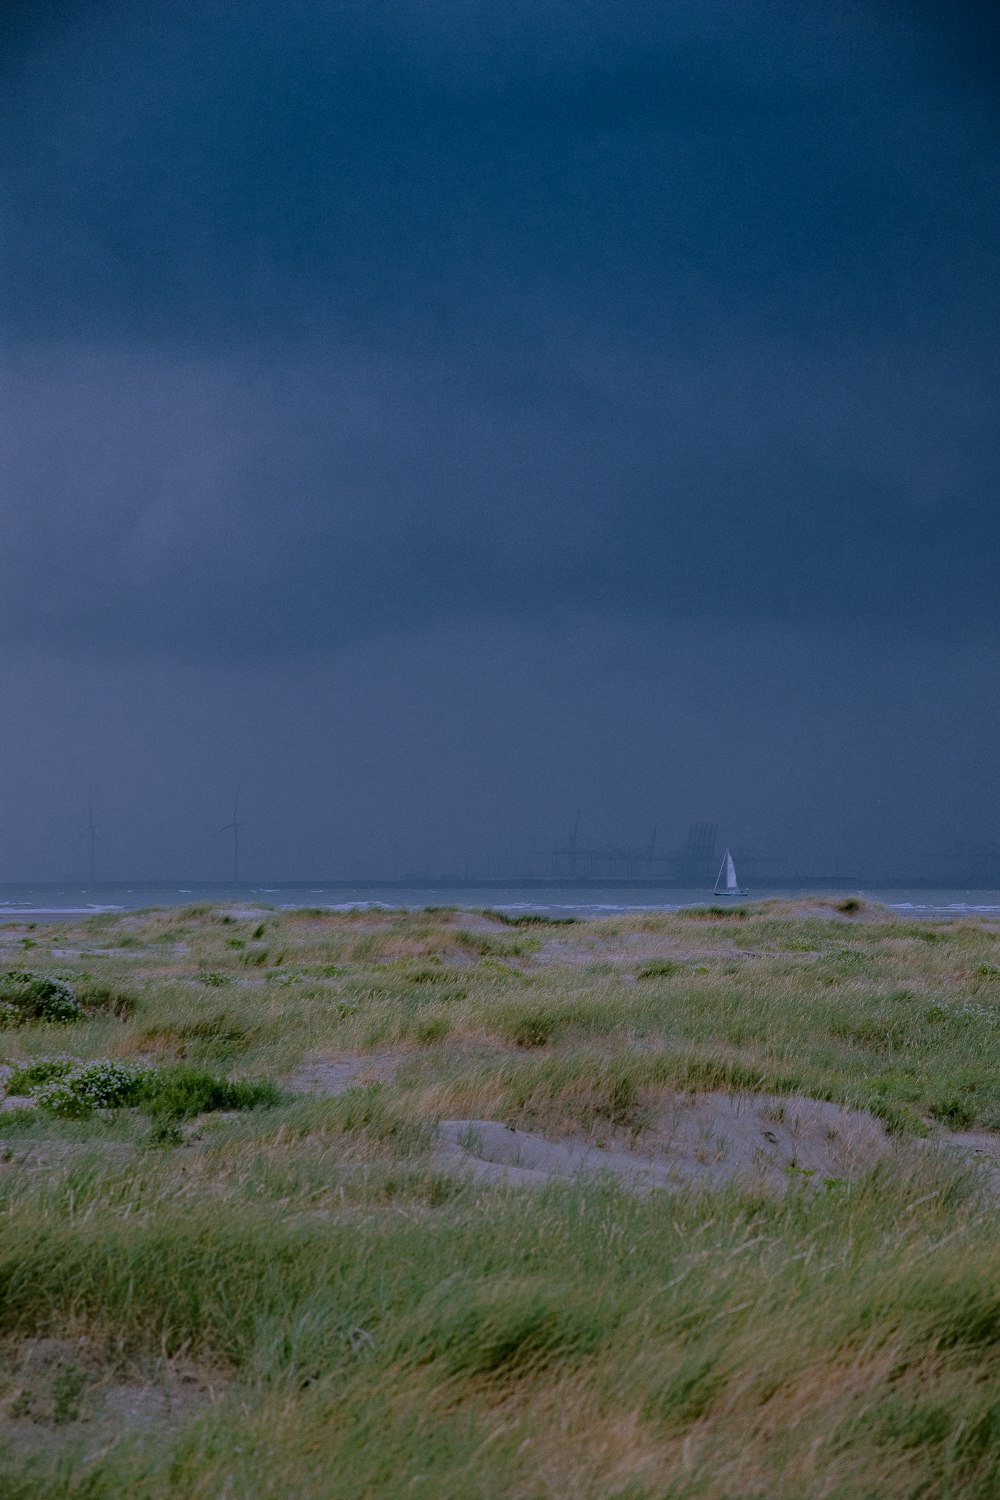 a lone sailboat in the distance on a cloudy day